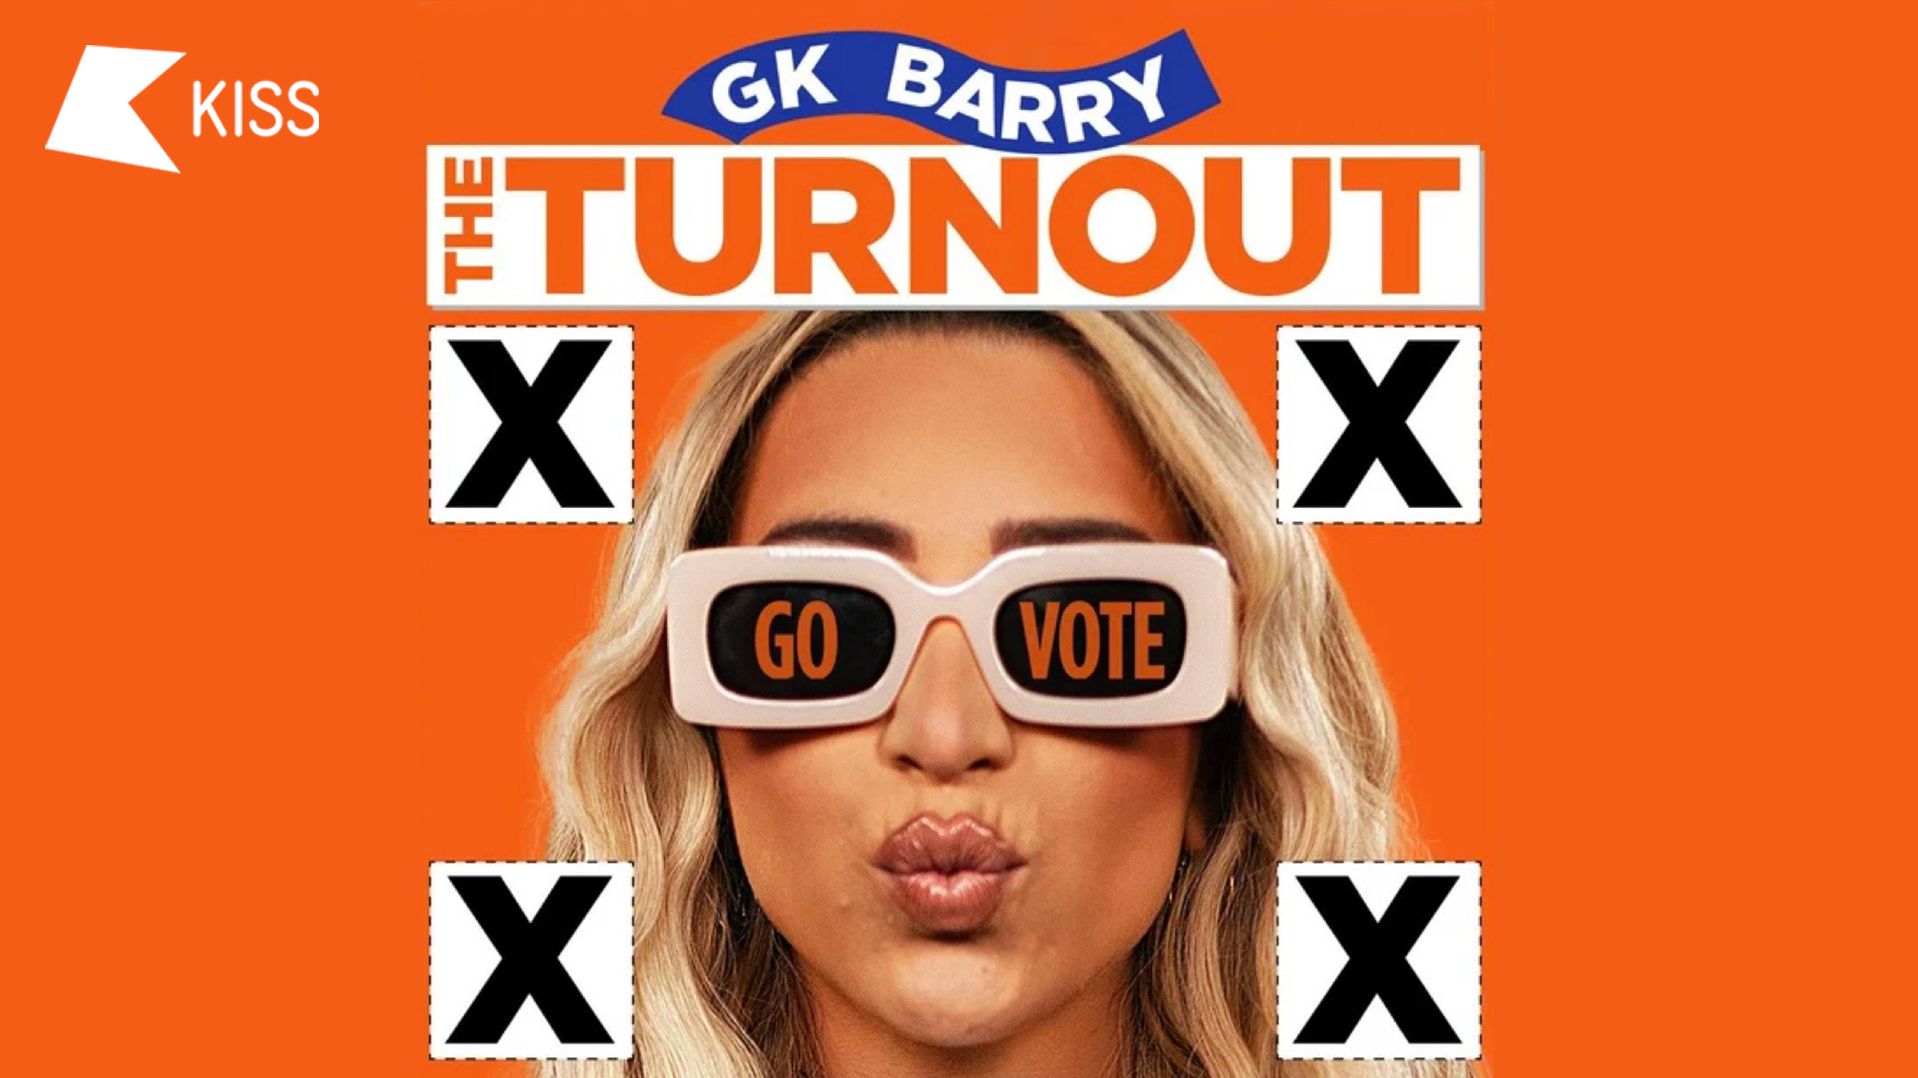 Bauer Media Audio UK announces NEW GK Barry Podcast – The Turnout